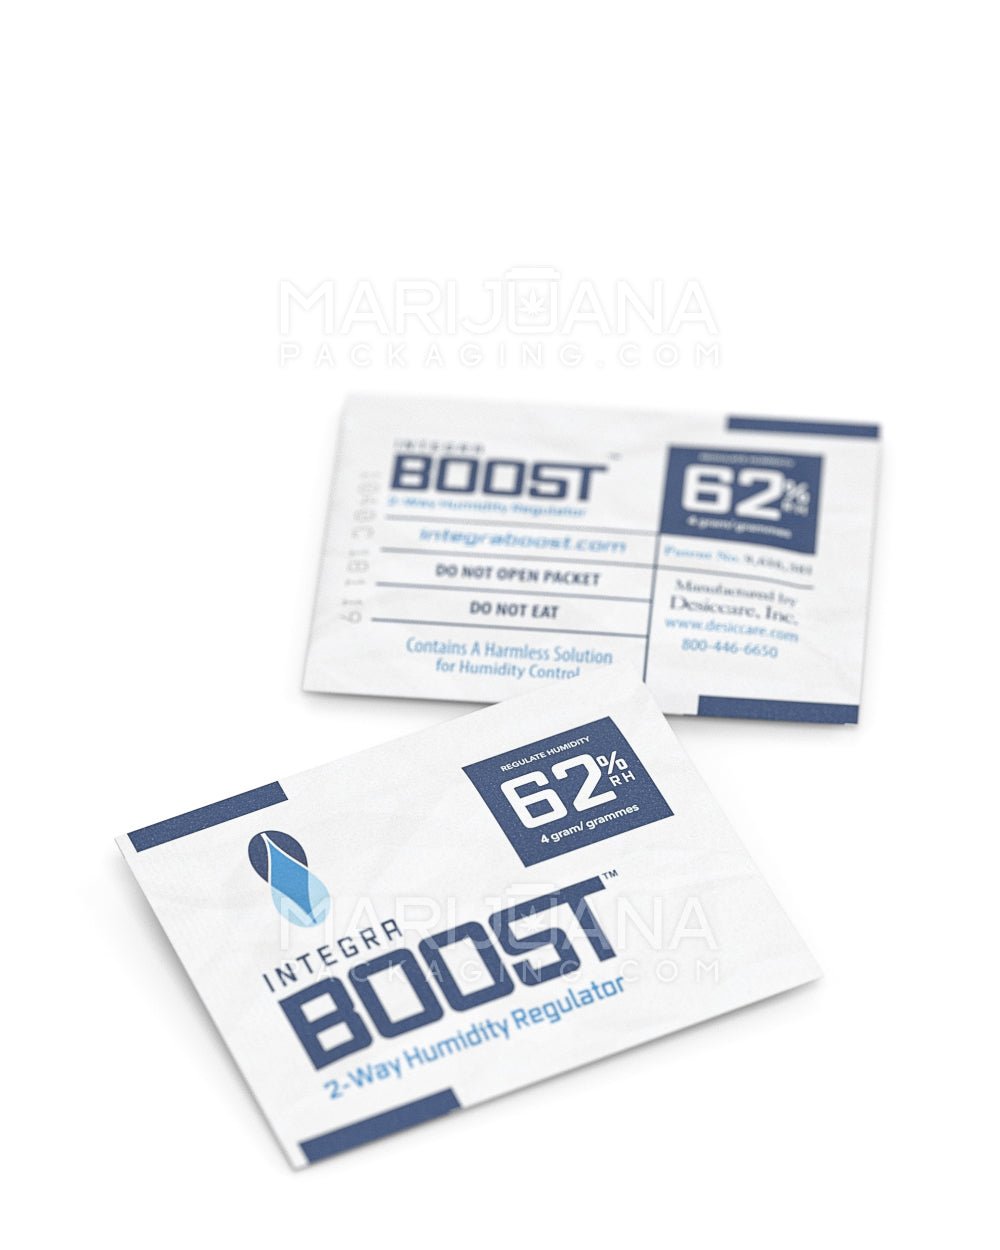 INTEGRA | Boost Humidity Pack | 4 Grams - 62% - 1000 Count - 5